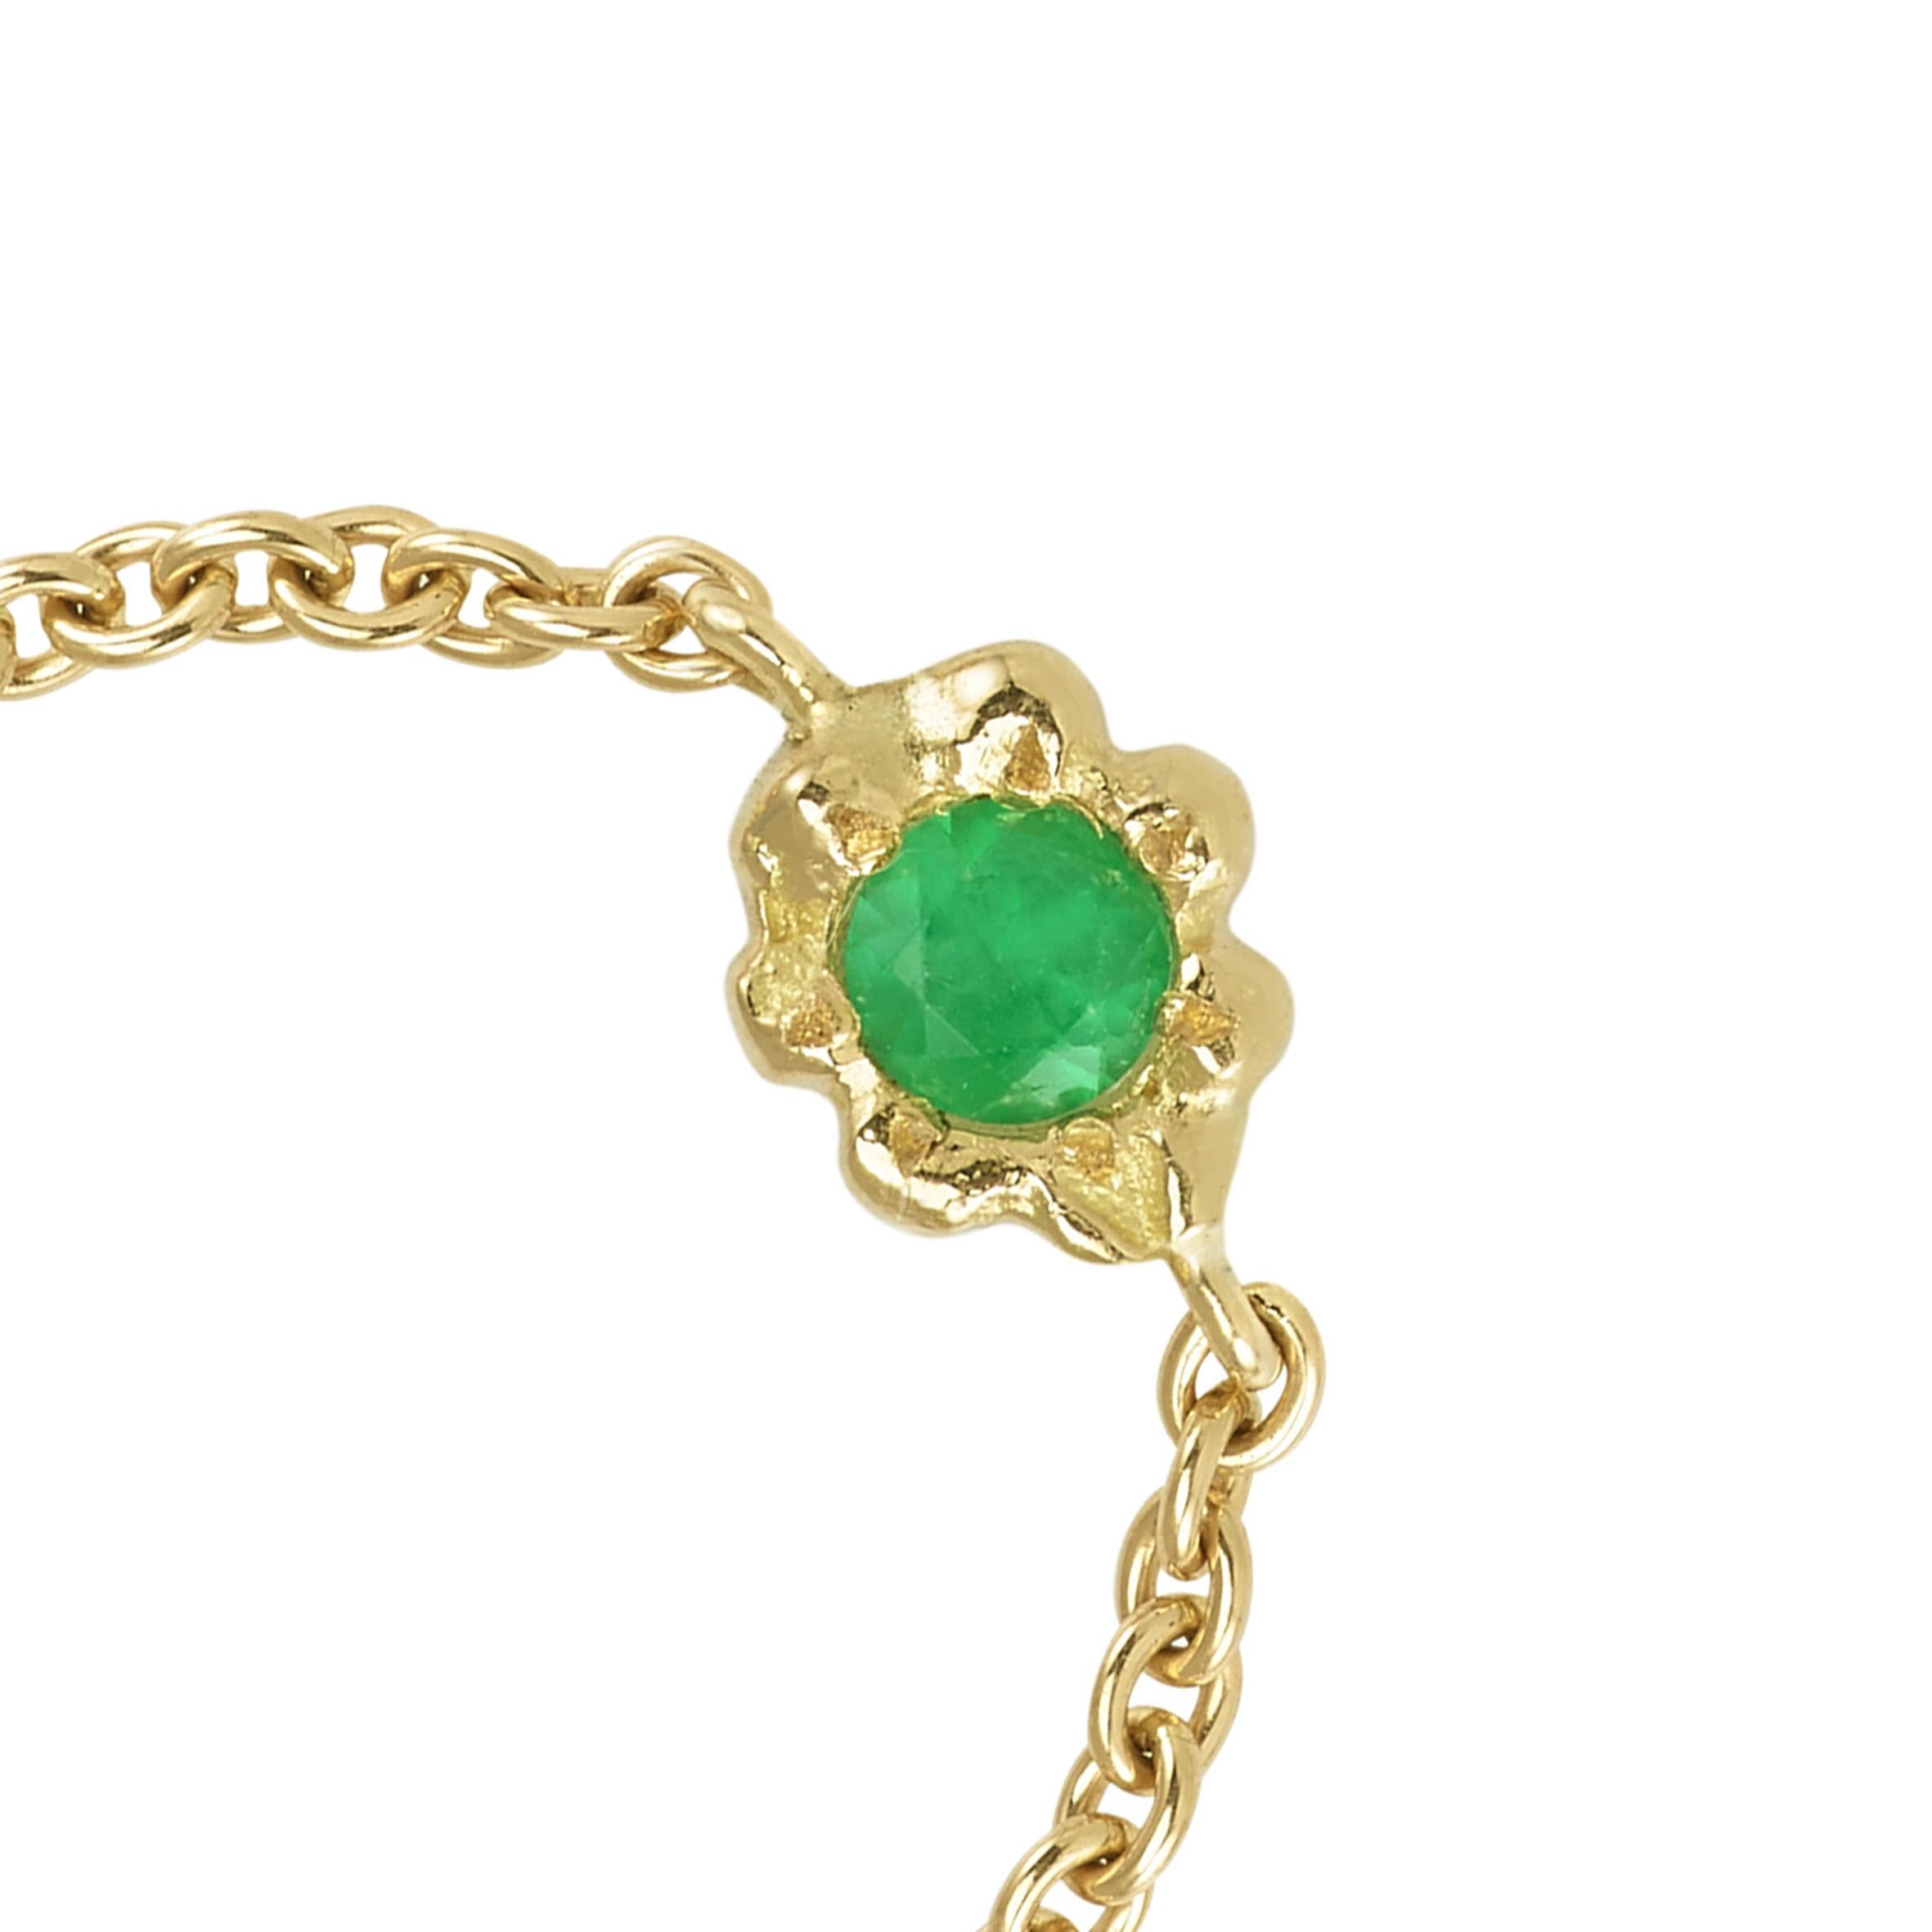 This ring is handmade in 18 Karat Yellow Gold. It is set with an Emerald, approximately 0.3 carats. The ring band is a chain that is moveable in order for it to position itself nicely on the finger for real comfort. Its weight is 1 gram